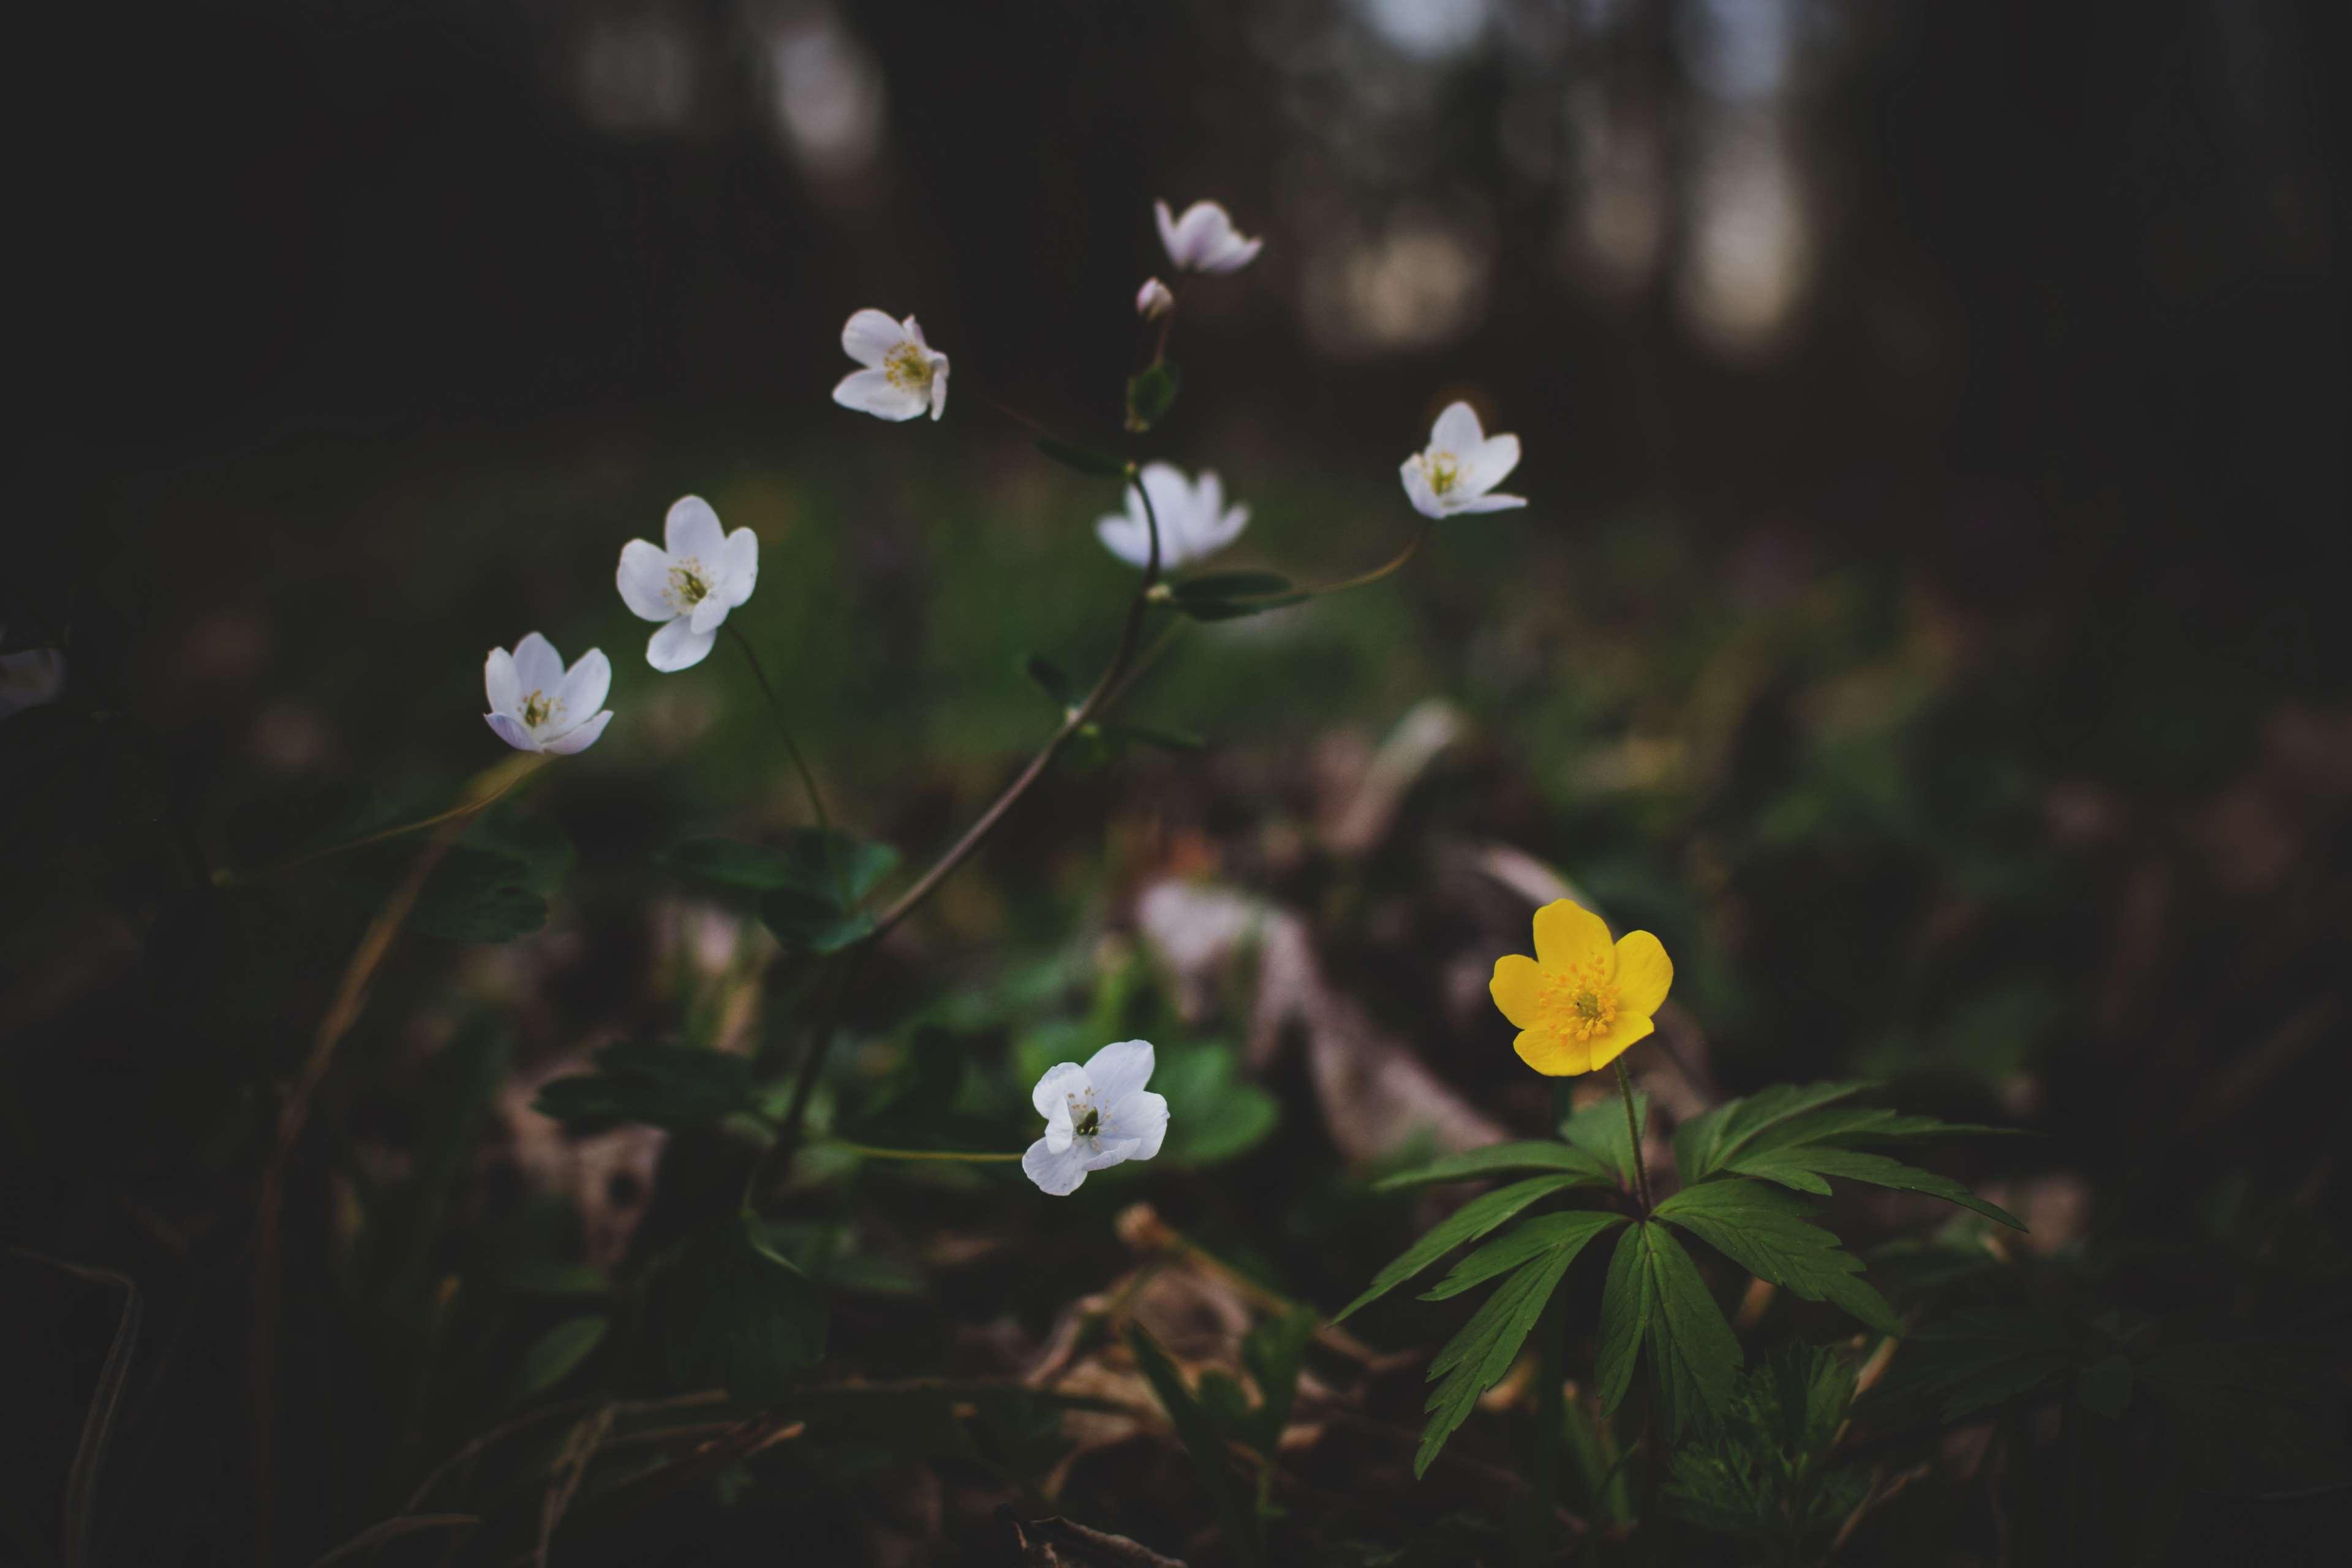 dawn, forest flowers, spring flowers, white flowers